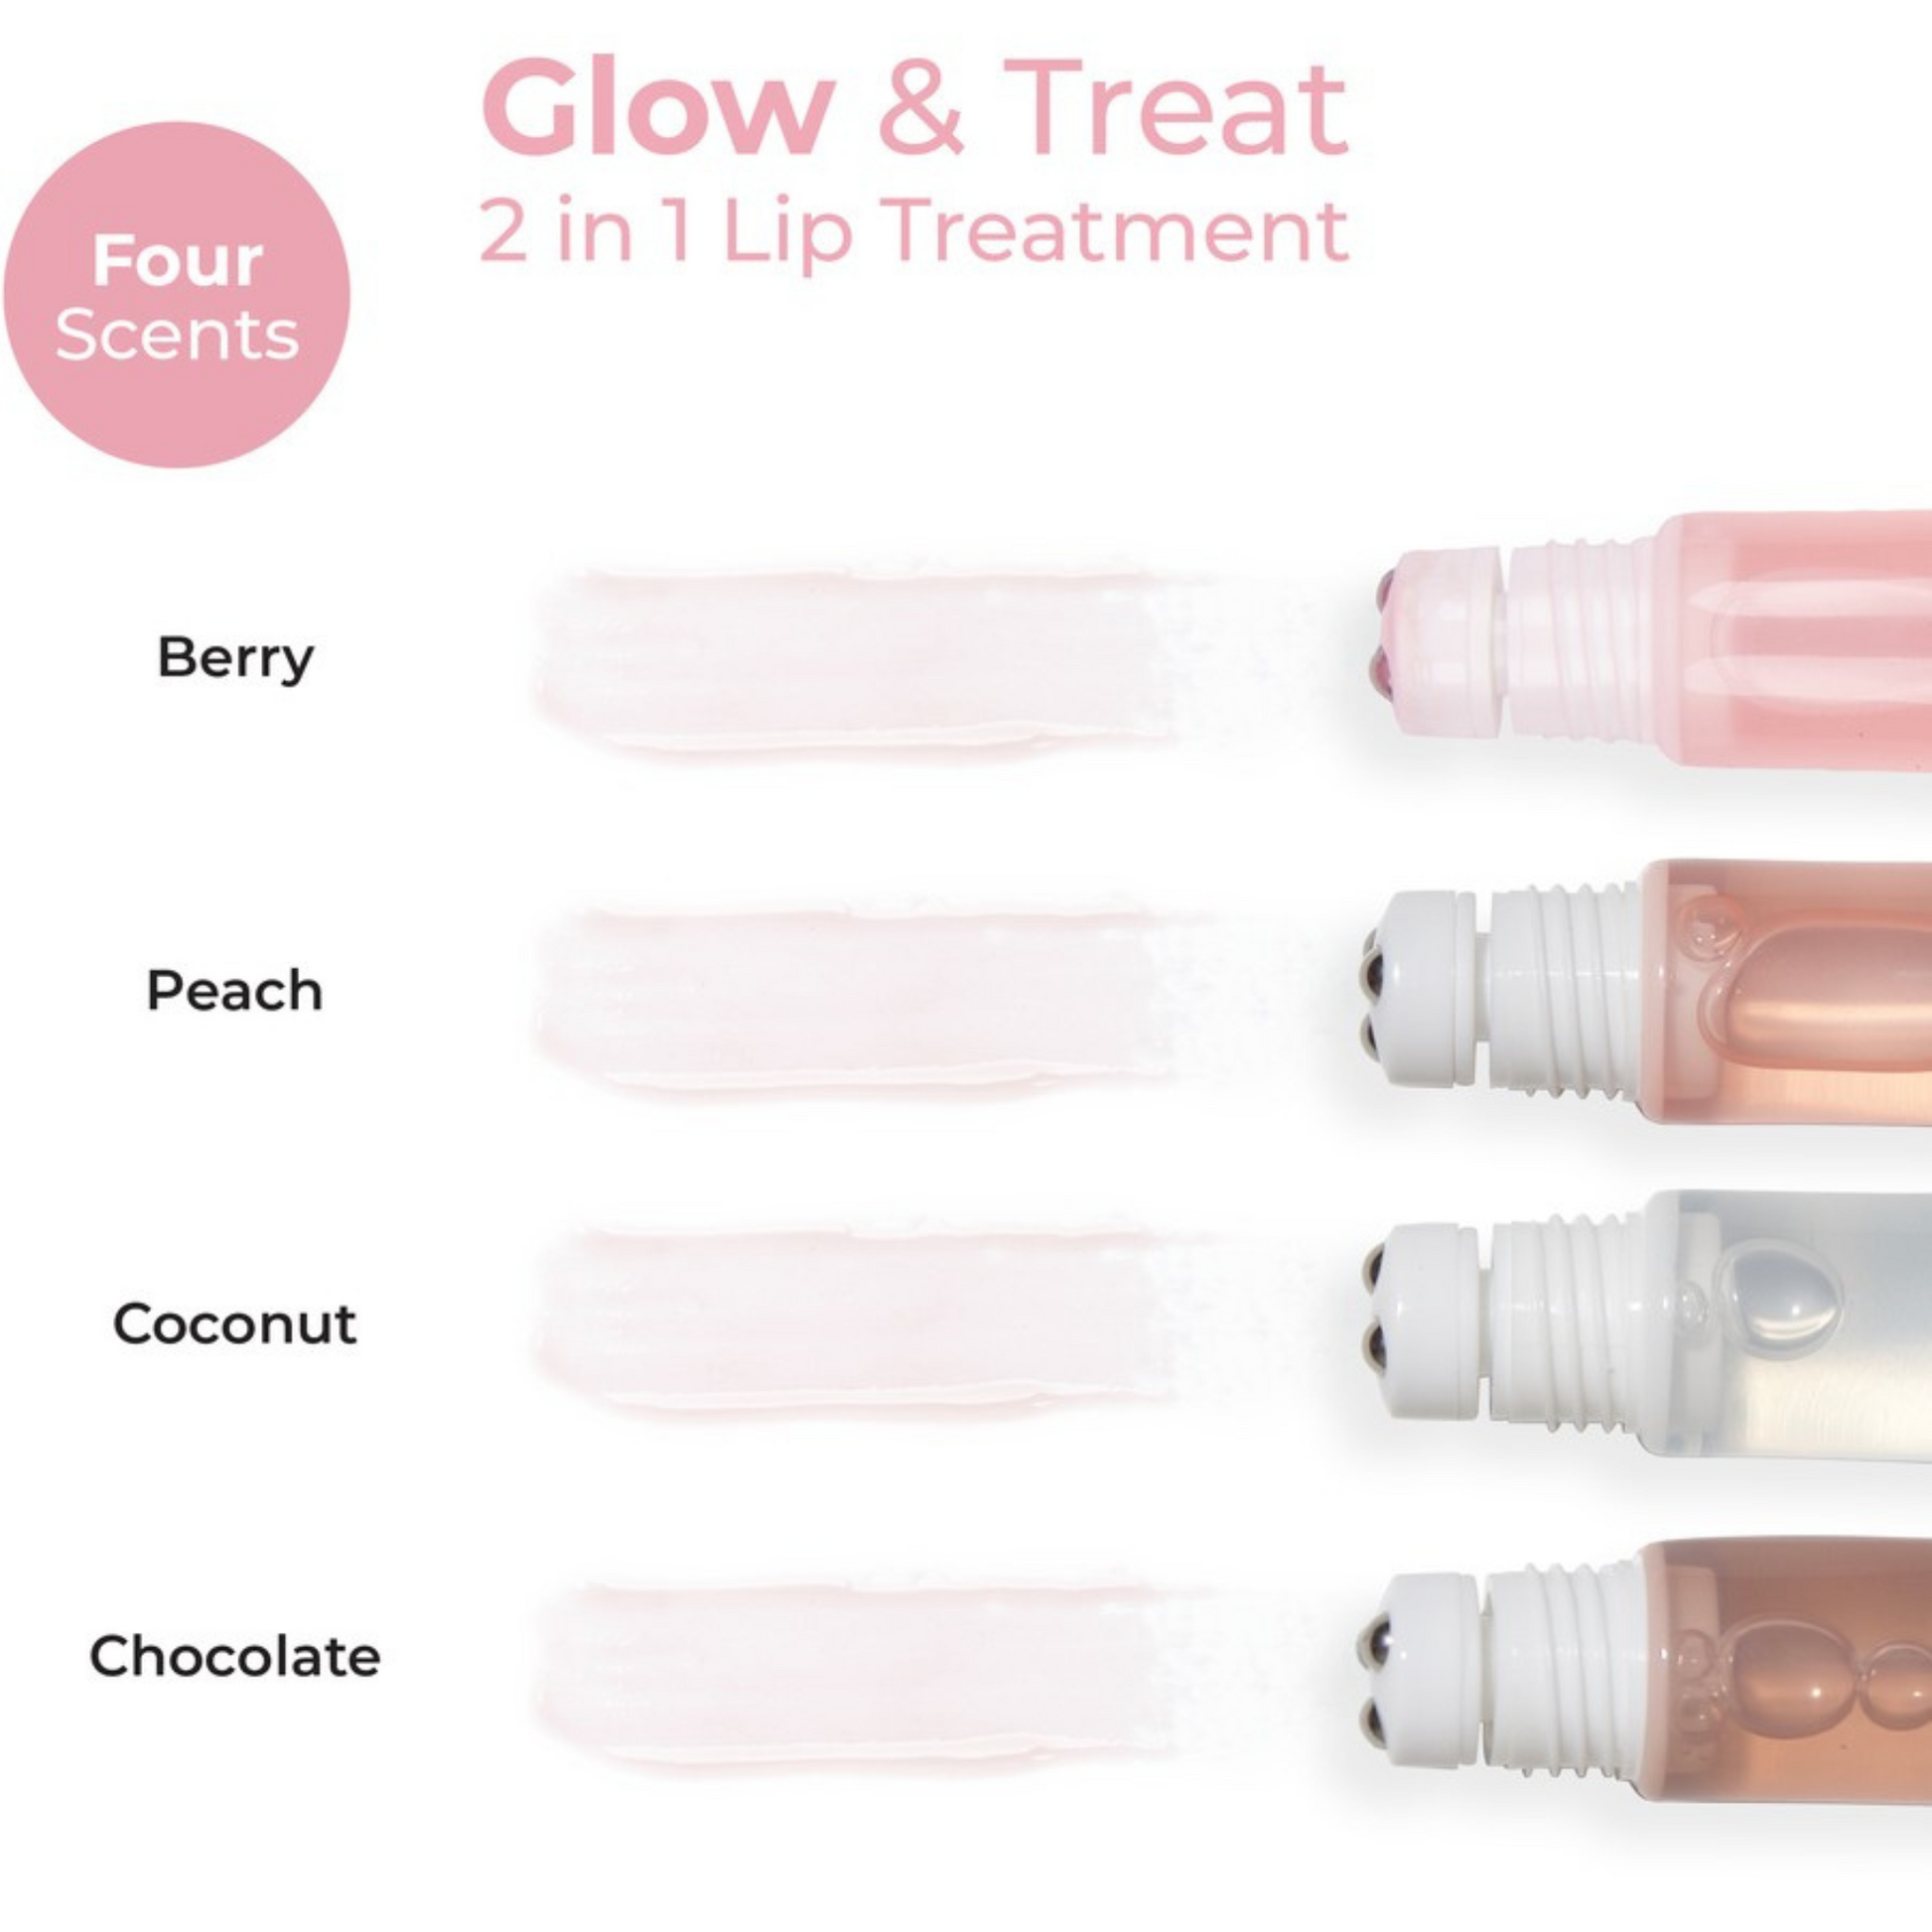 MCoBeauty 2-in-1 Glow & Treat Lip Treatment Oil gives your lips the hydration boost & treatment. Best imported foreign Australian Aussie brand genuine authentic original real skin care skincare beauty cosmetics cosmetic repair luxury premium cheap price in Dhaka Chittagong Sylhet Bangladesh.